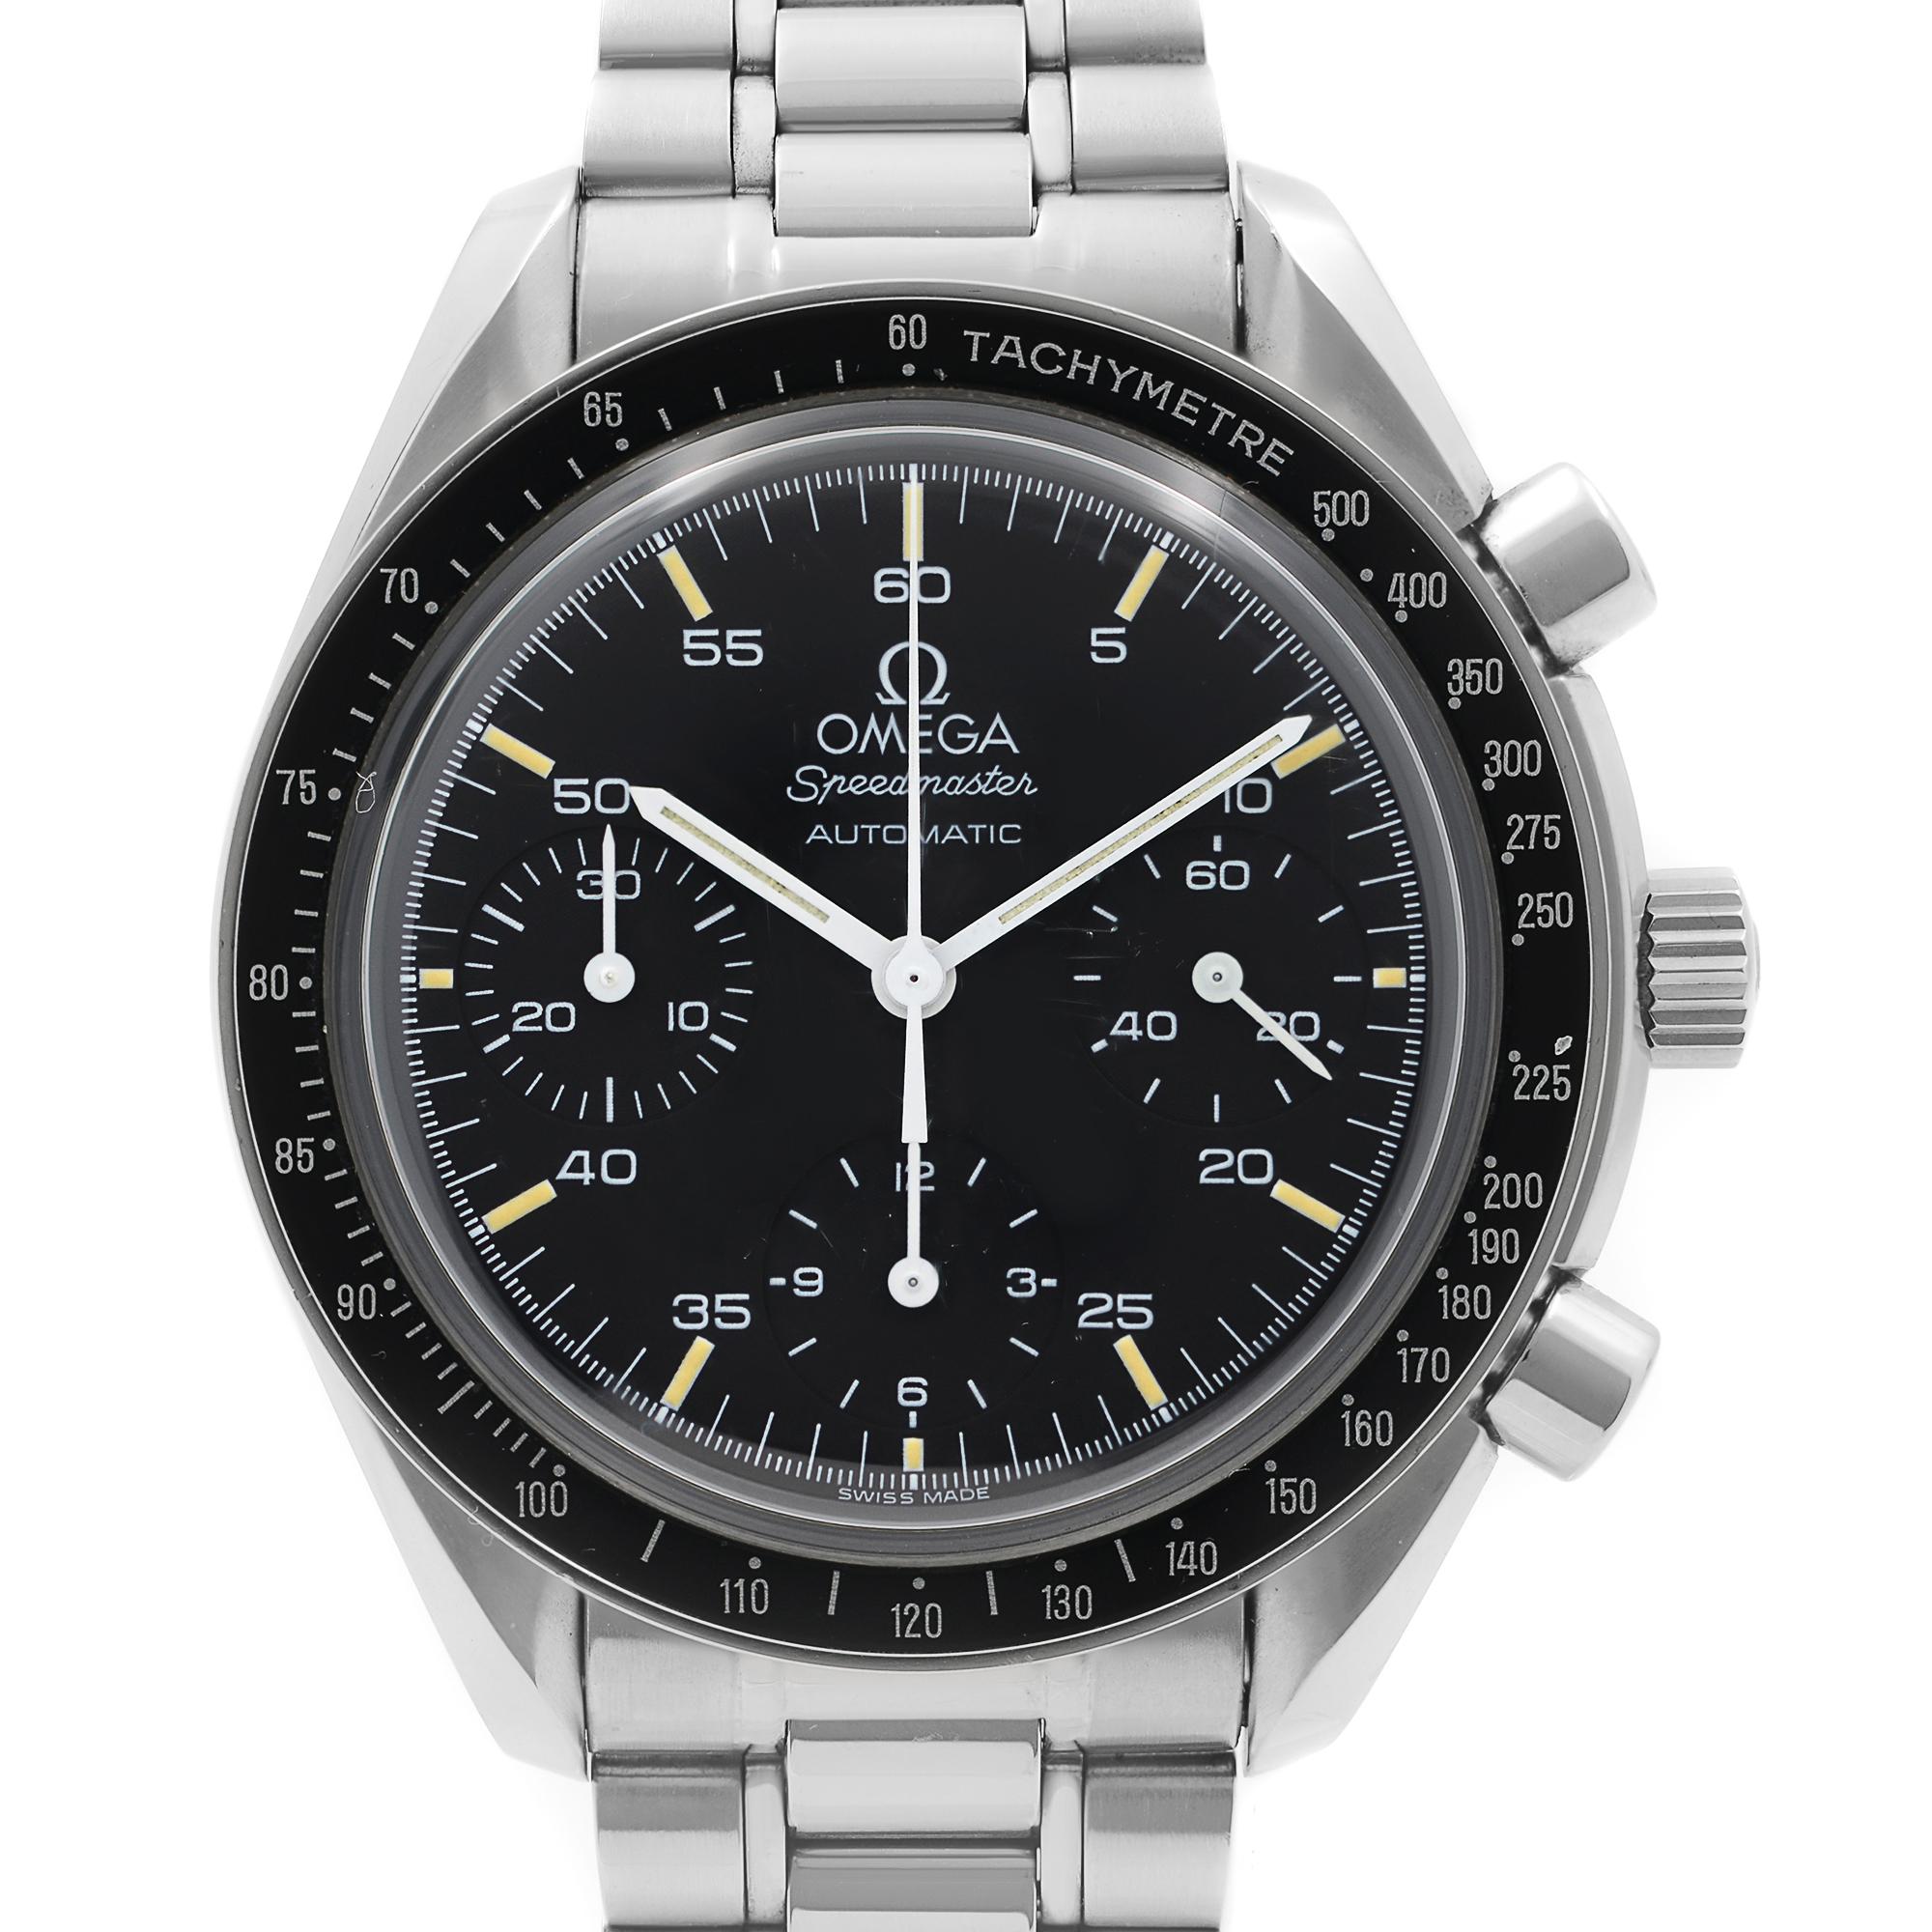 Pre Owned Omega Speedmaster Reduced 39mm Chronograph Steel Black Dial Men Watch 3510.50.00. This Beautiful Timepiece Features: Stainless Steel Case & Bracelet Fixed Stainless Steel Bezel with Black Tachymeter Scale Top Ring, Black Dial with Luminous